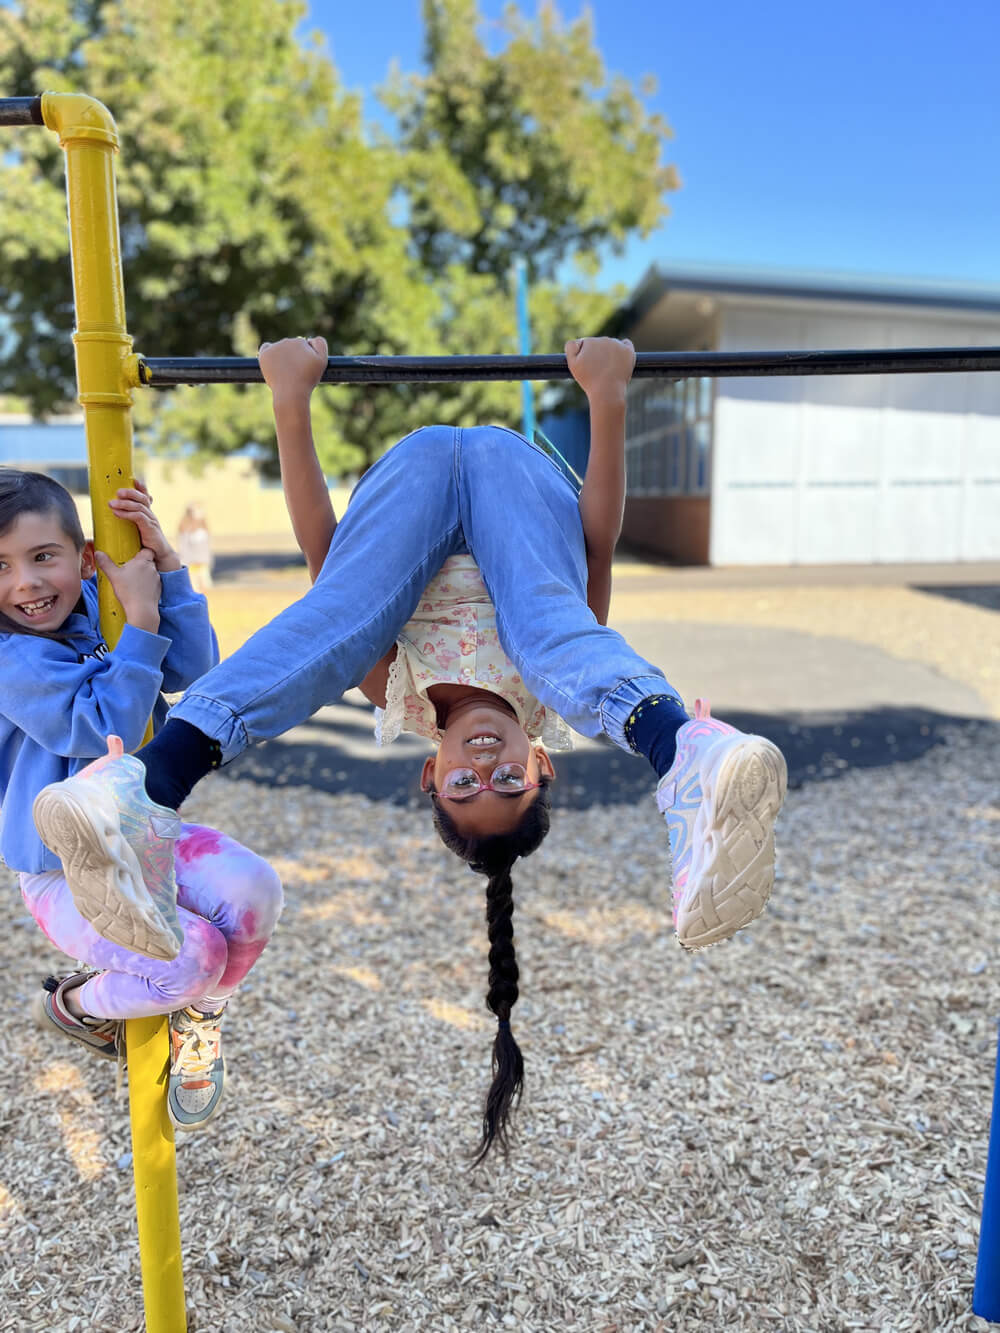 a student laughing as she's flipping upside down on the monkey bars